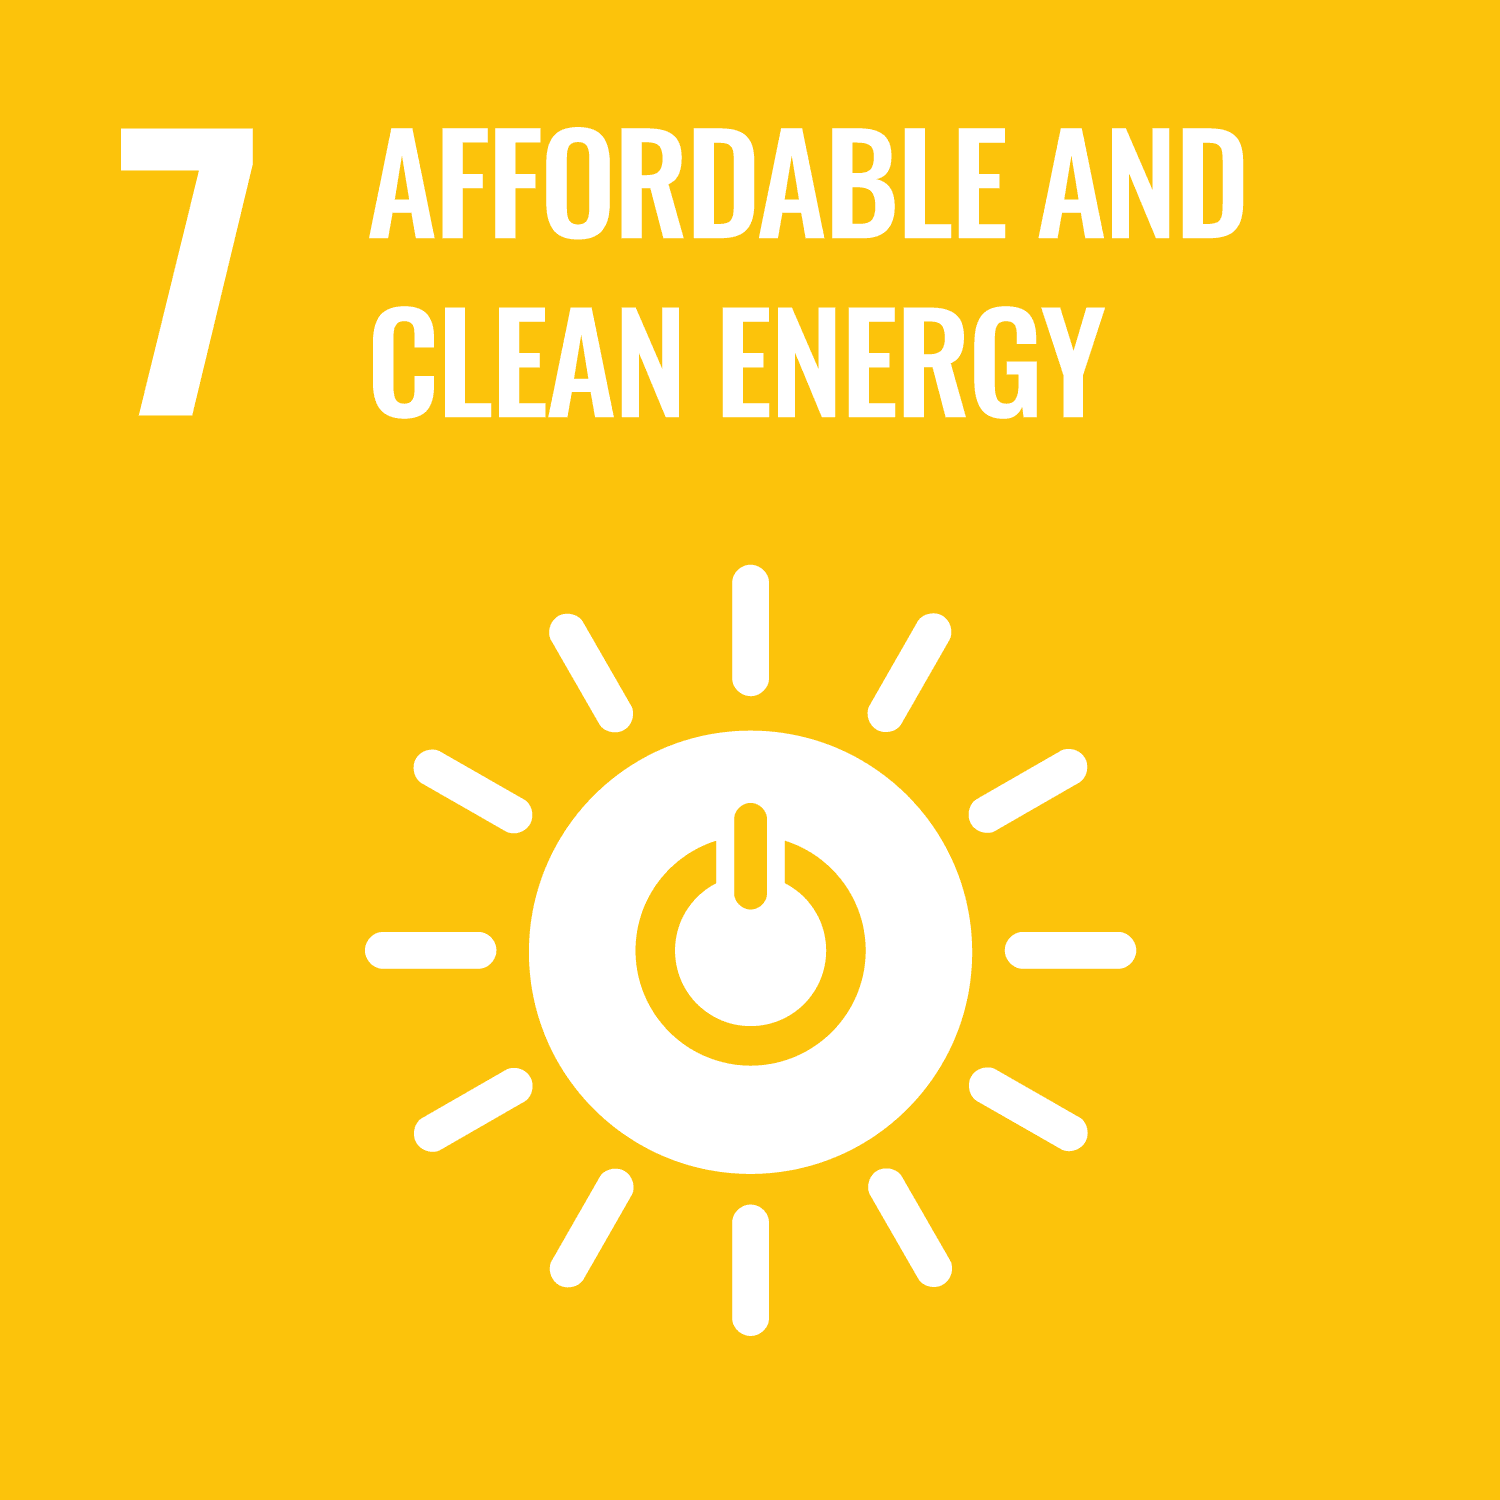 Graphic image of a sun with a power logo in the centre saying '7 affordable and clean energy' reflecting Sustainable Development Goal (SDG) or Global Goal 7